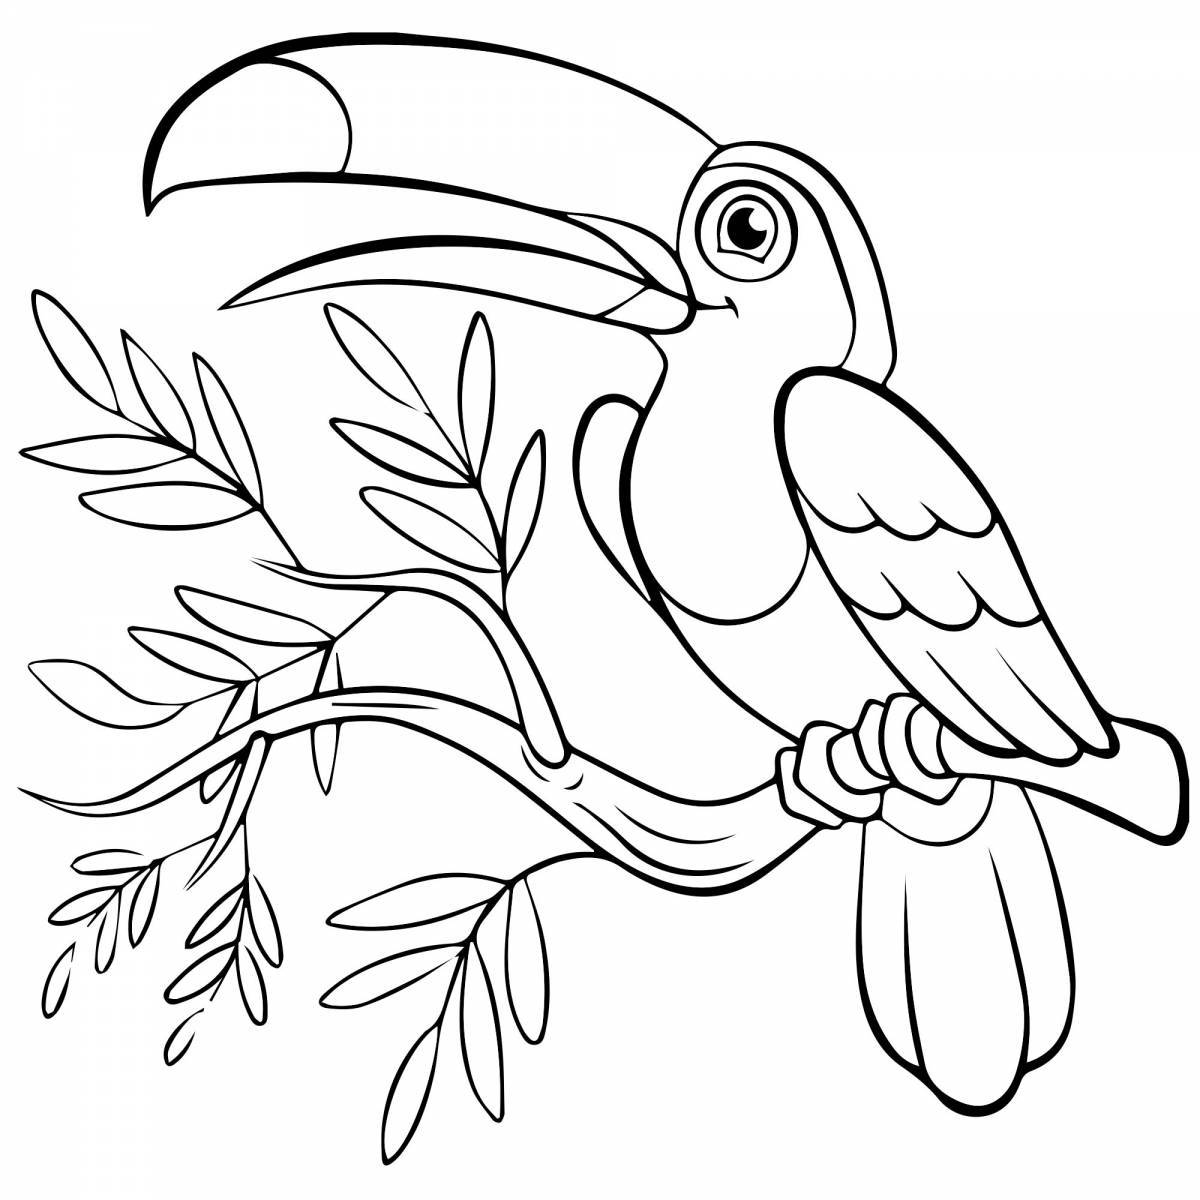 Animated bird coloring book for kids